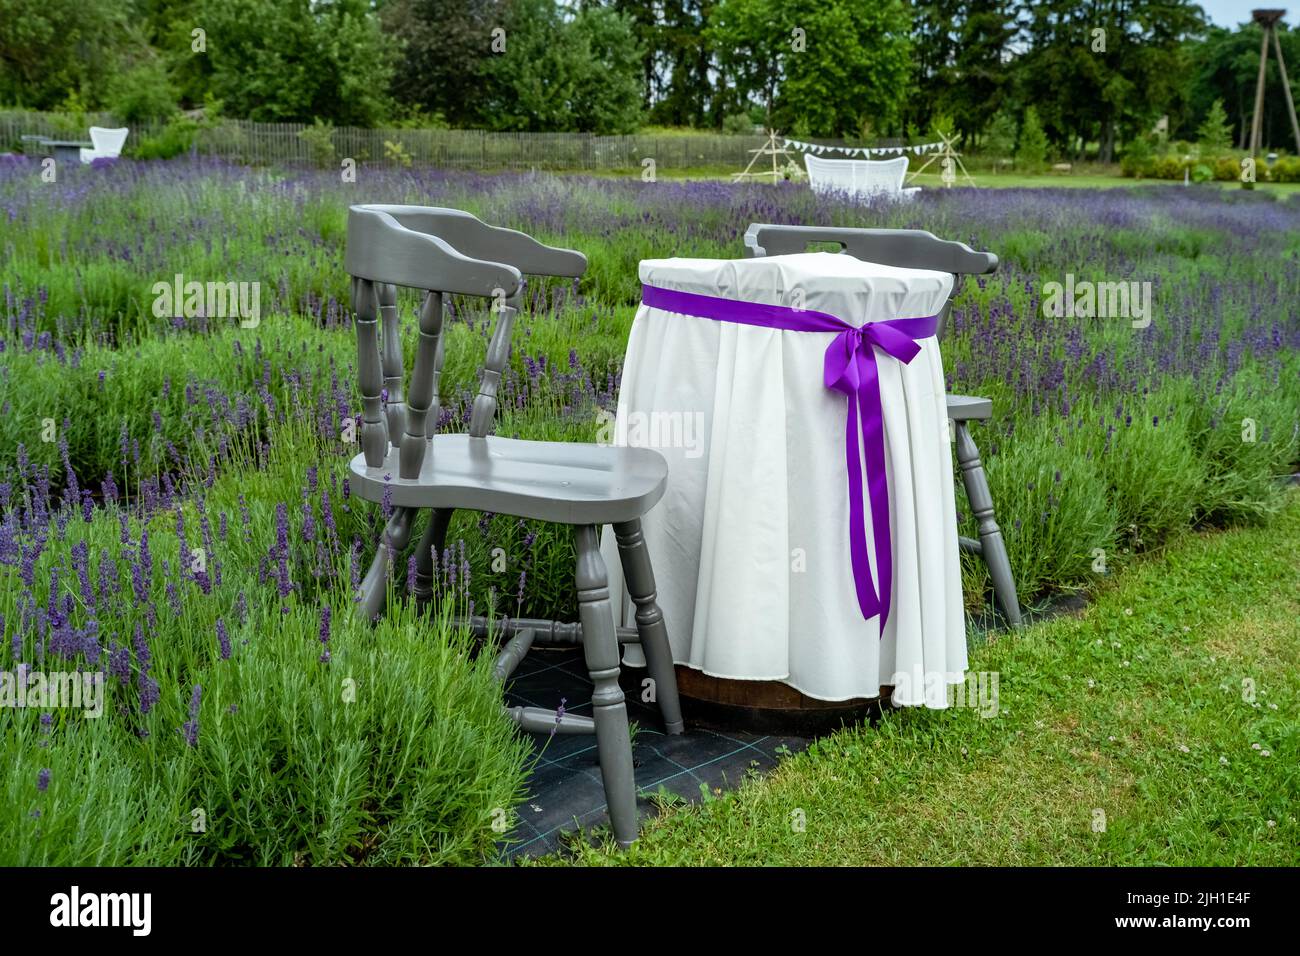 Furniture folding table and chairs for outdoor recreation in a blooming lavender field with a vase of lavender on the table. Background of a natural l Stock Photo